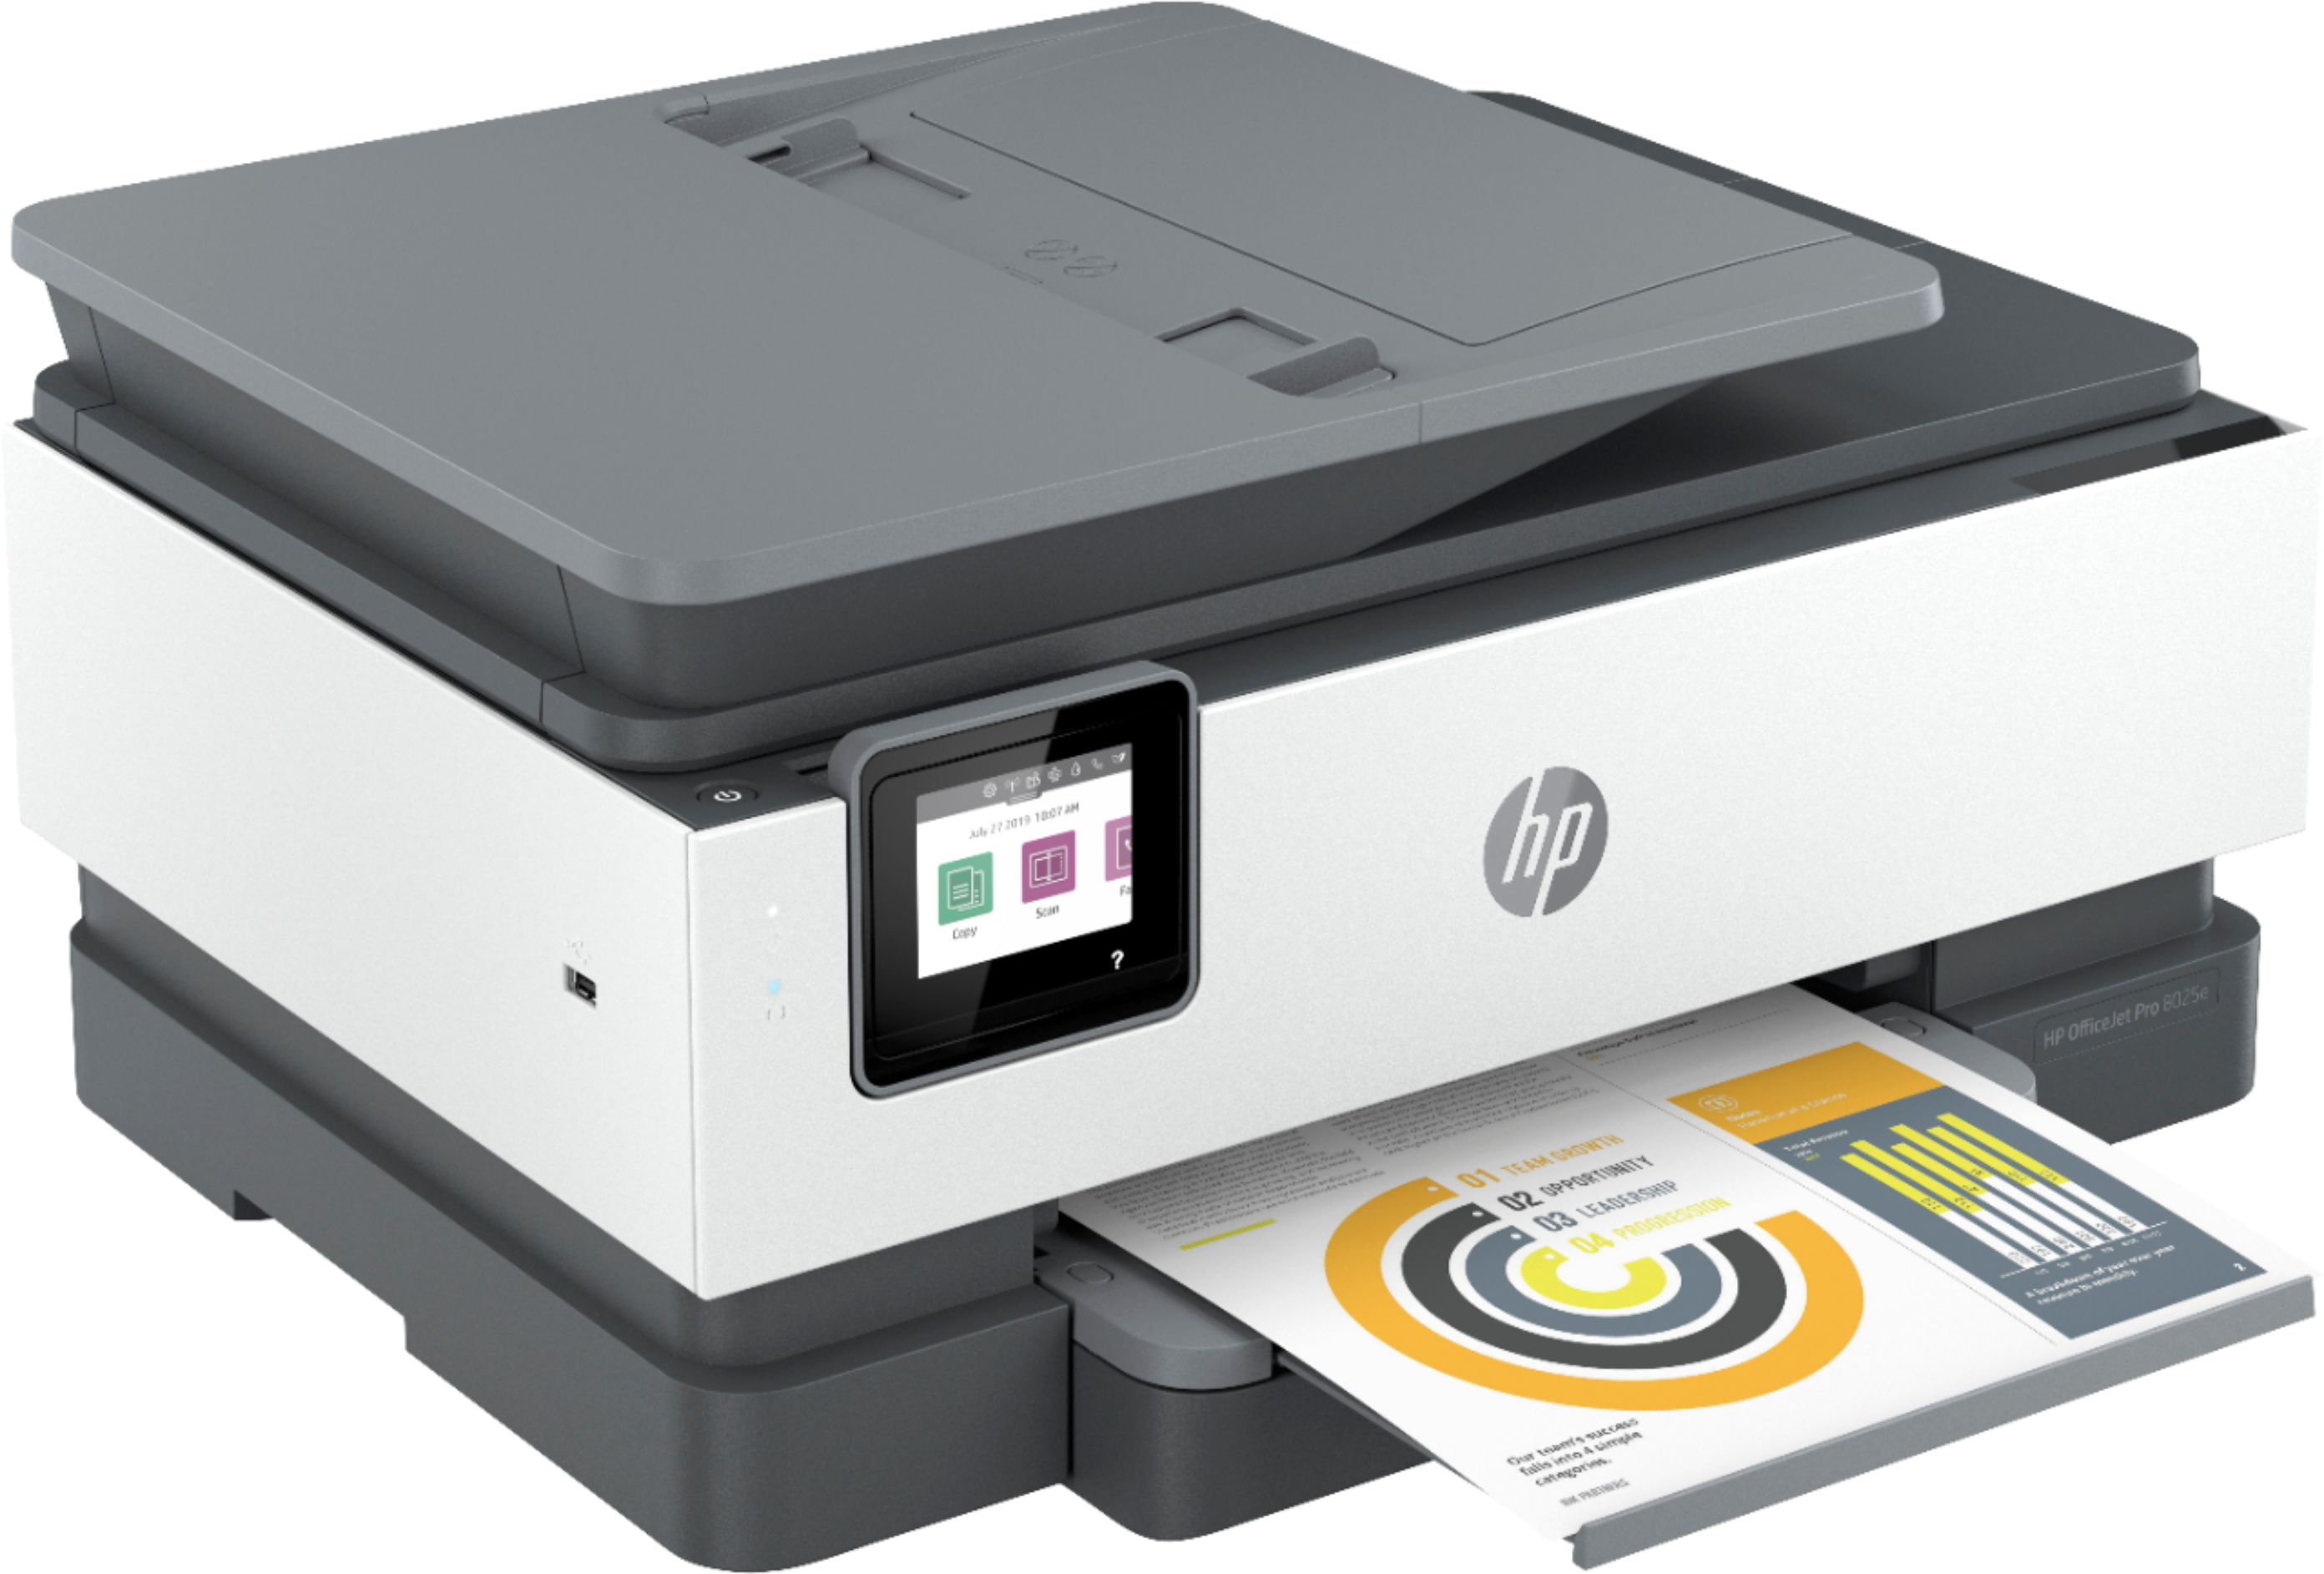 Hp Officejet Pro 8025e Wireless All In One Inkjet Printer With 6 Months Of Instant Ink Included 4930